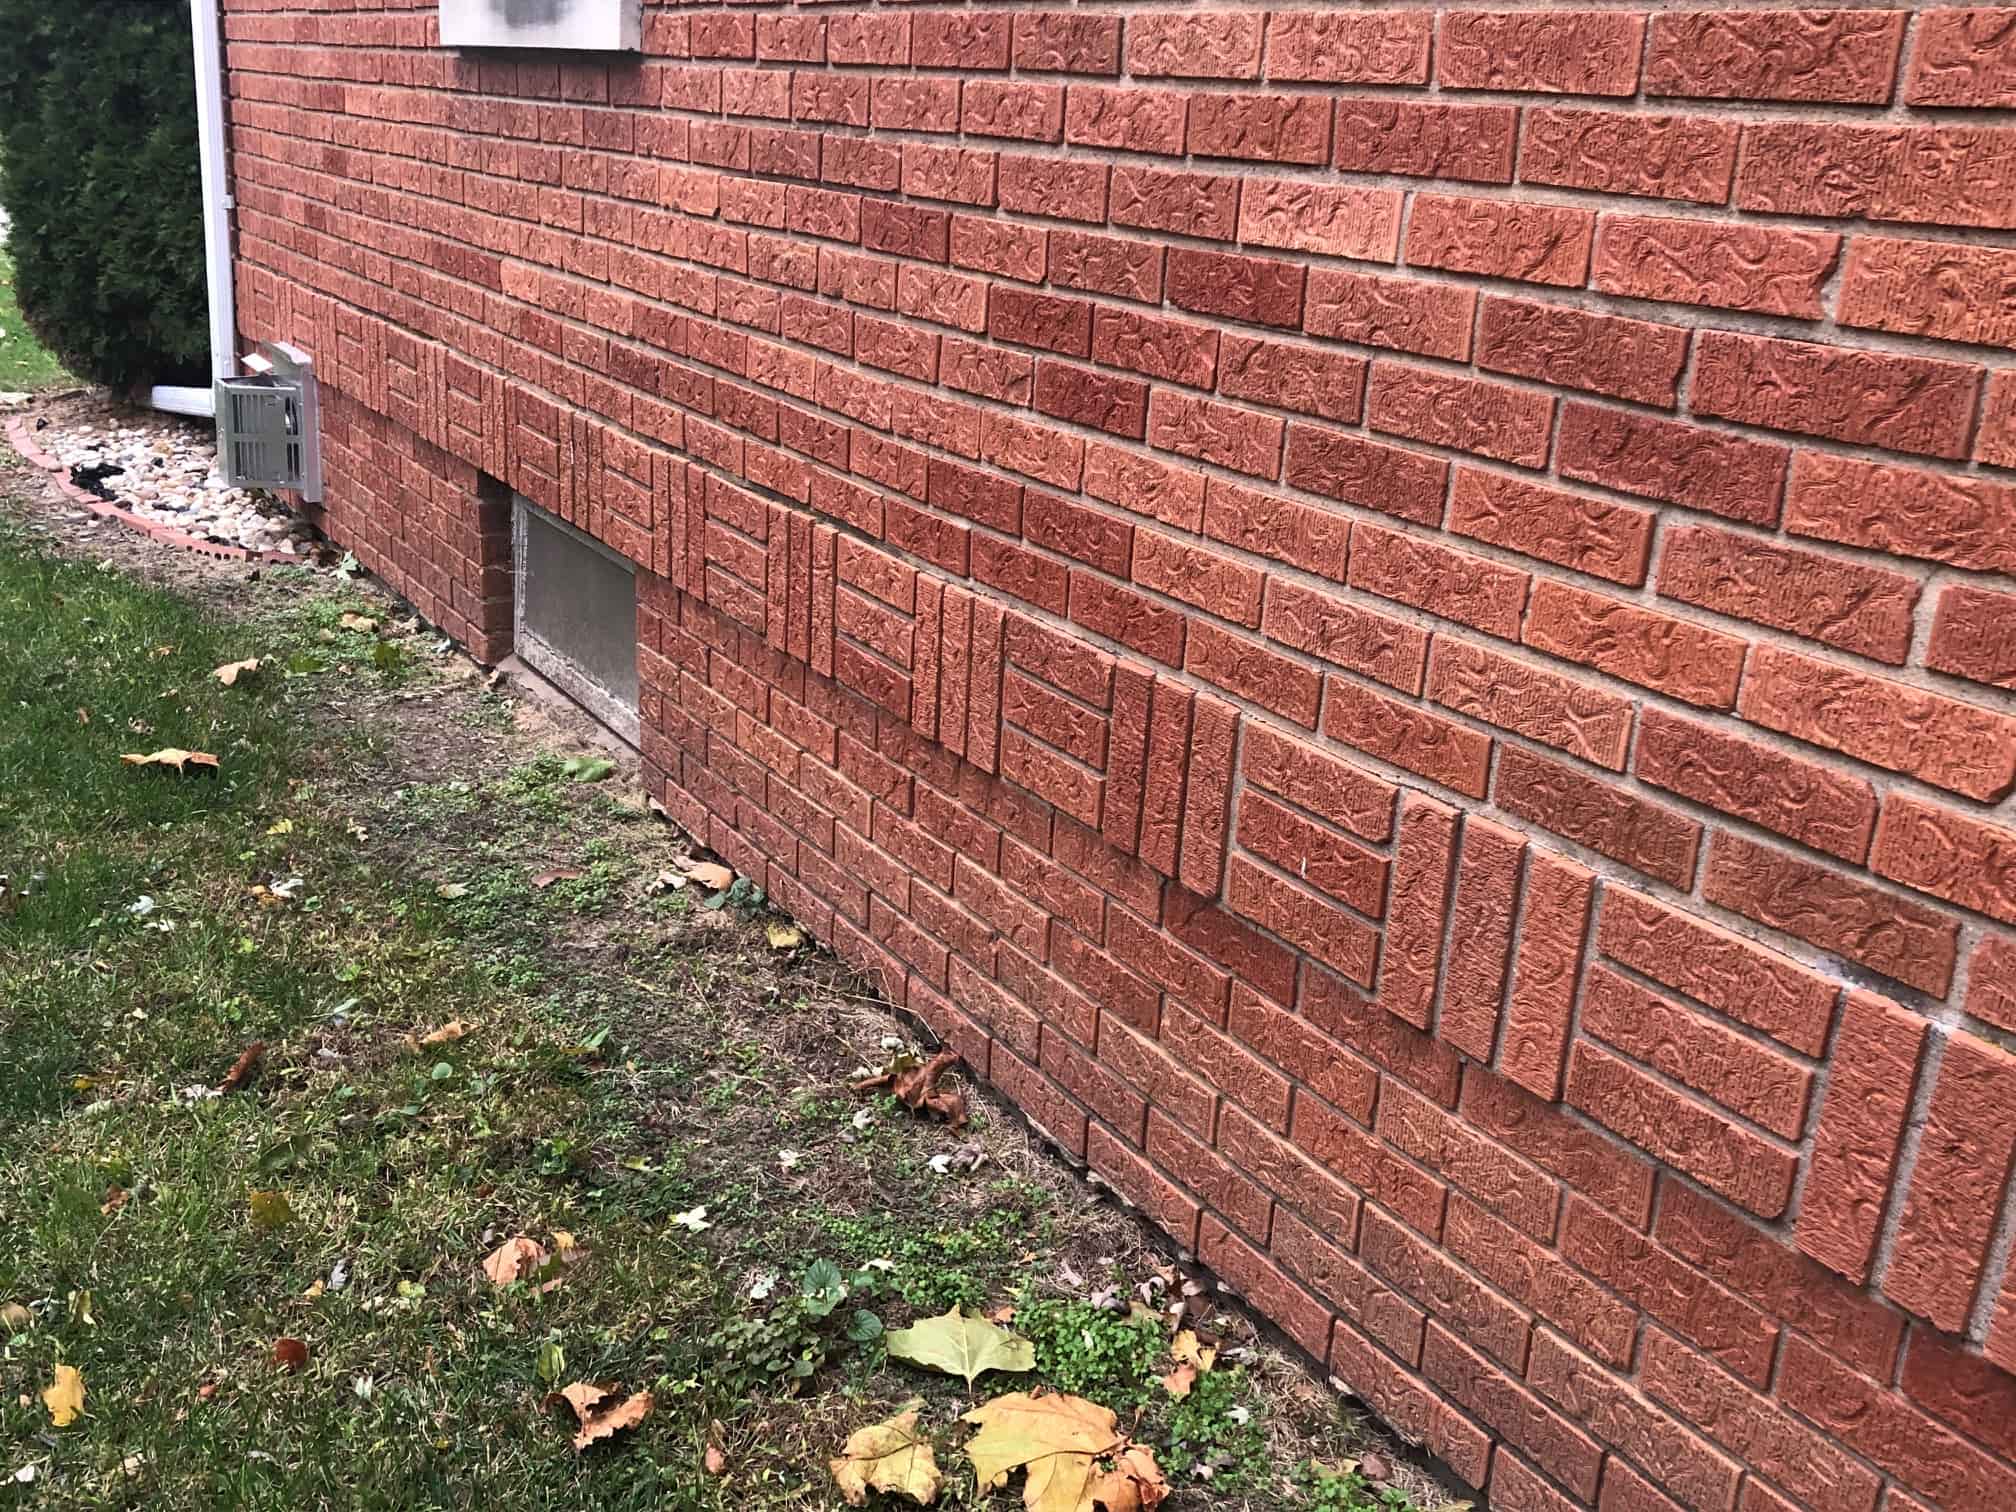 well structured brick wall